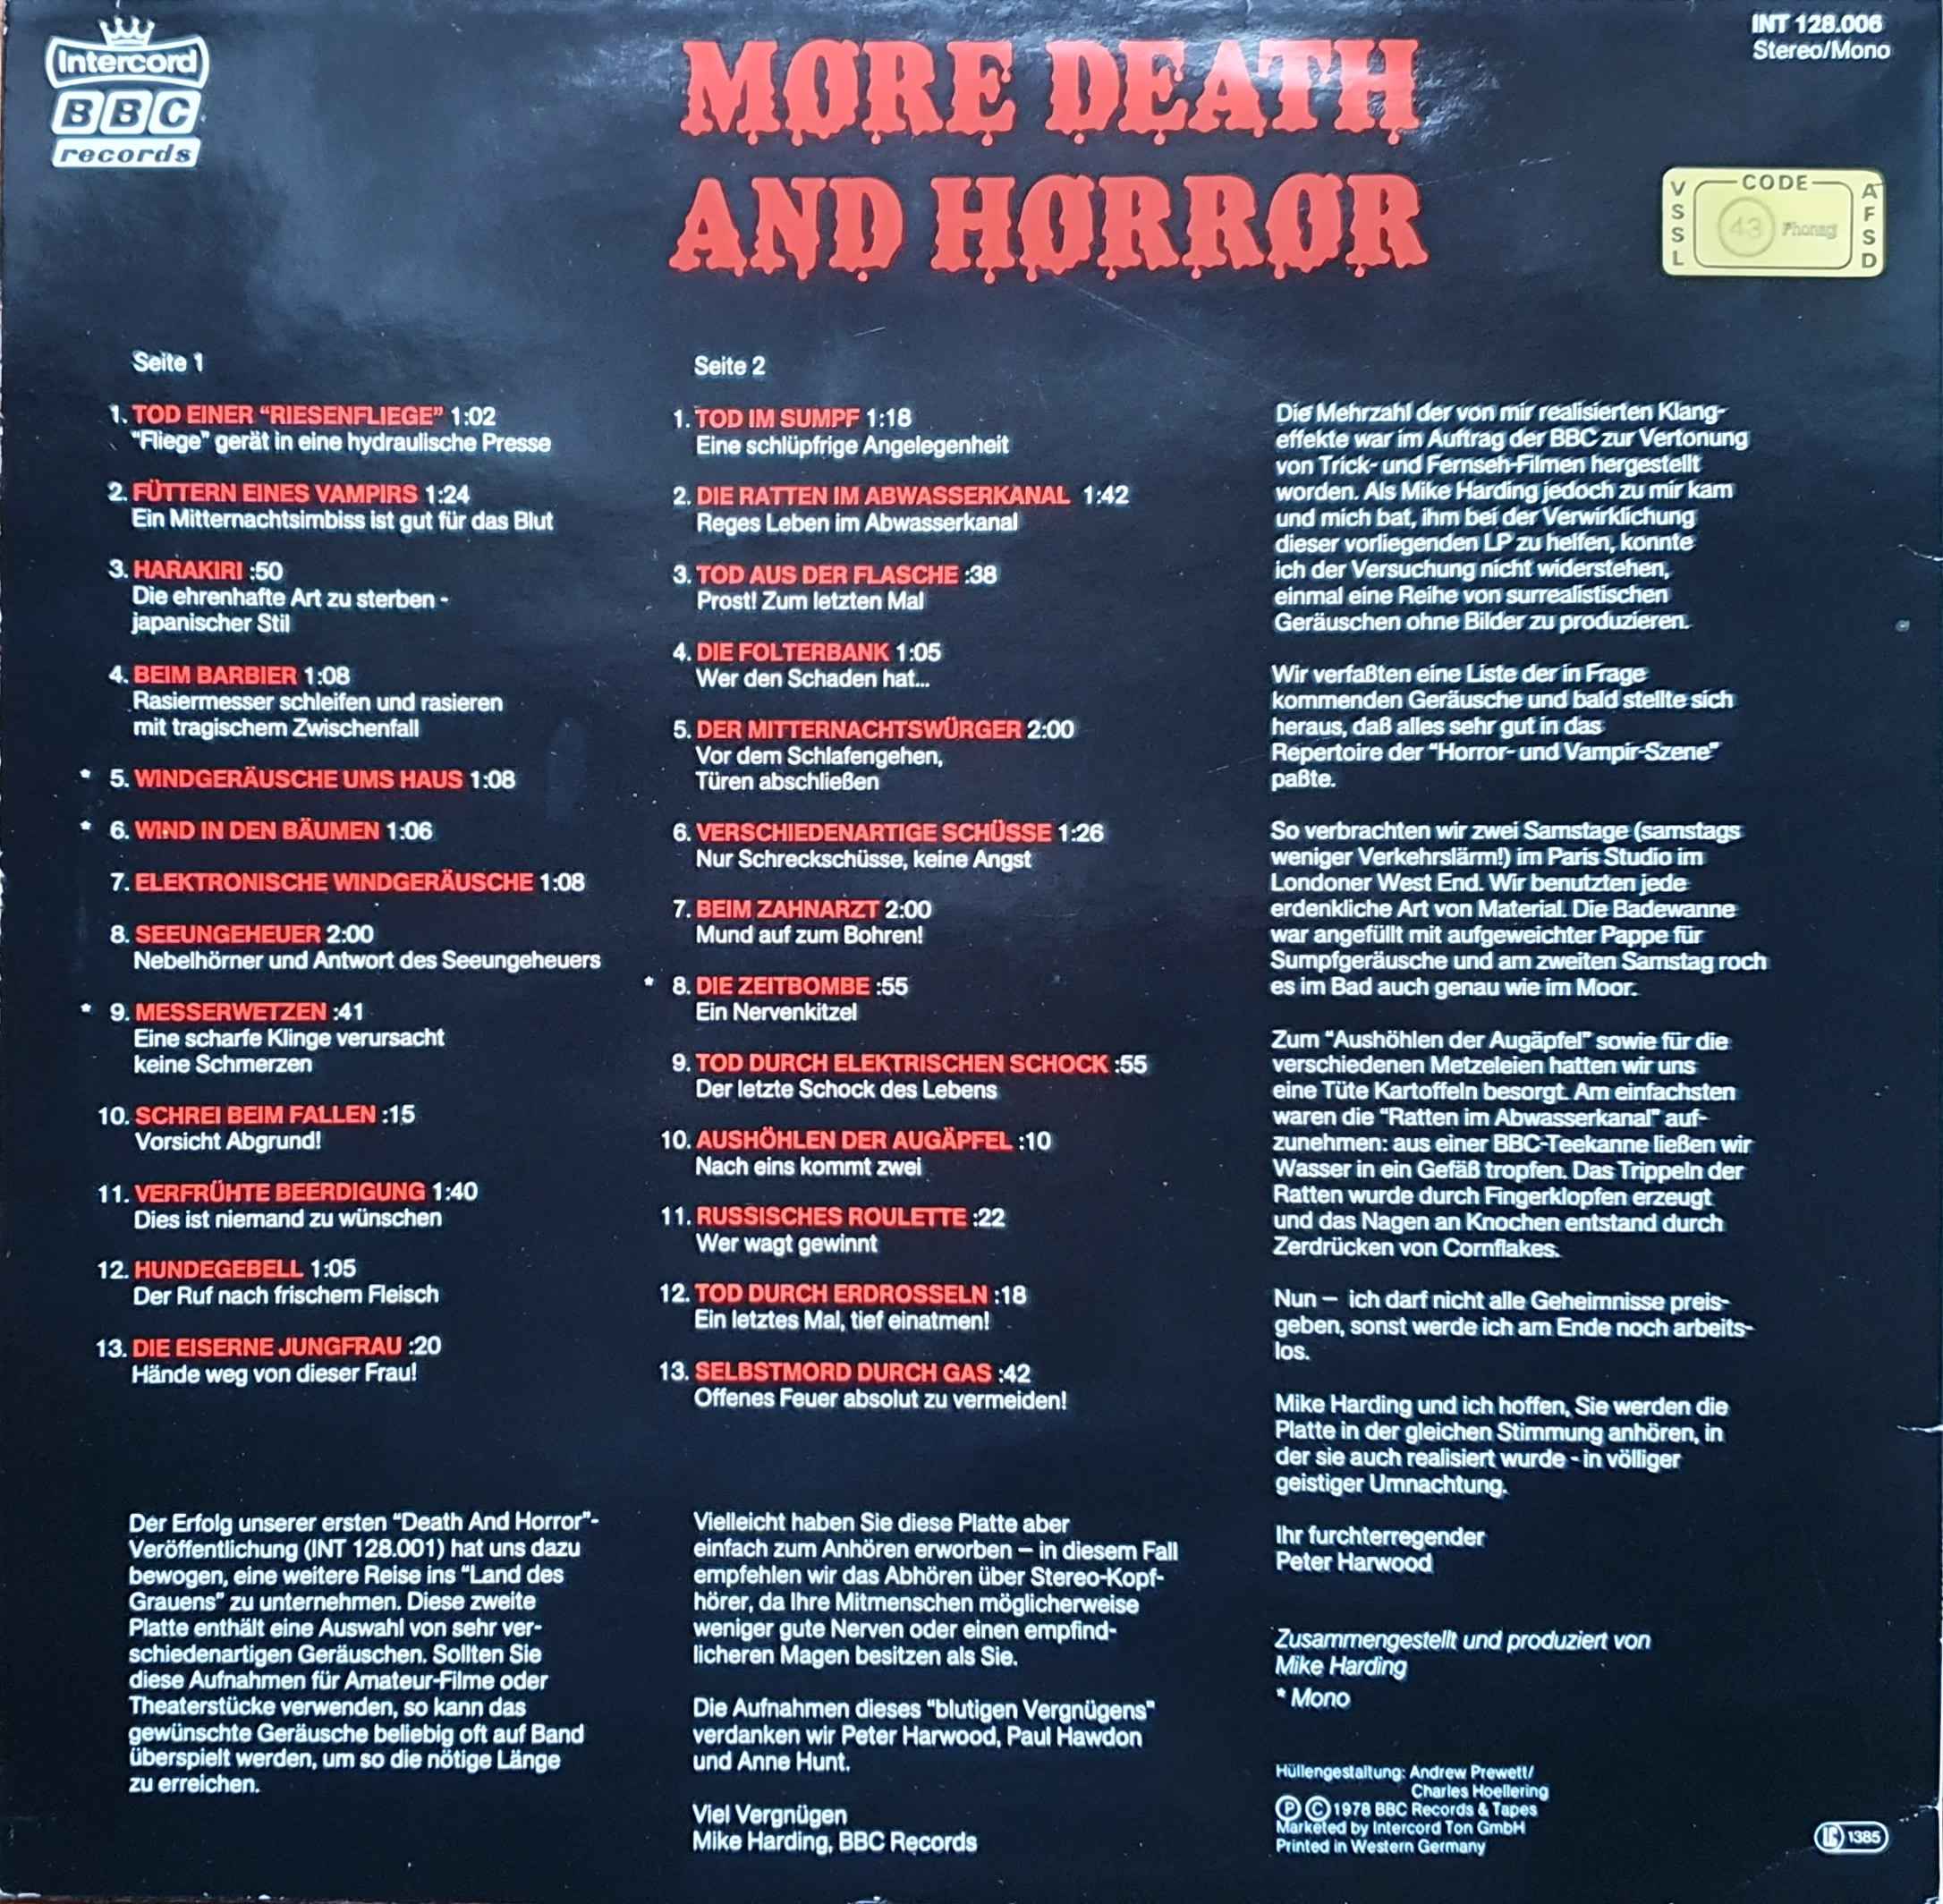 Picture of INT 128.006 More death and horror sound effects by artist Mike Harding / Peter Harwood from the BBC records and Tapes library